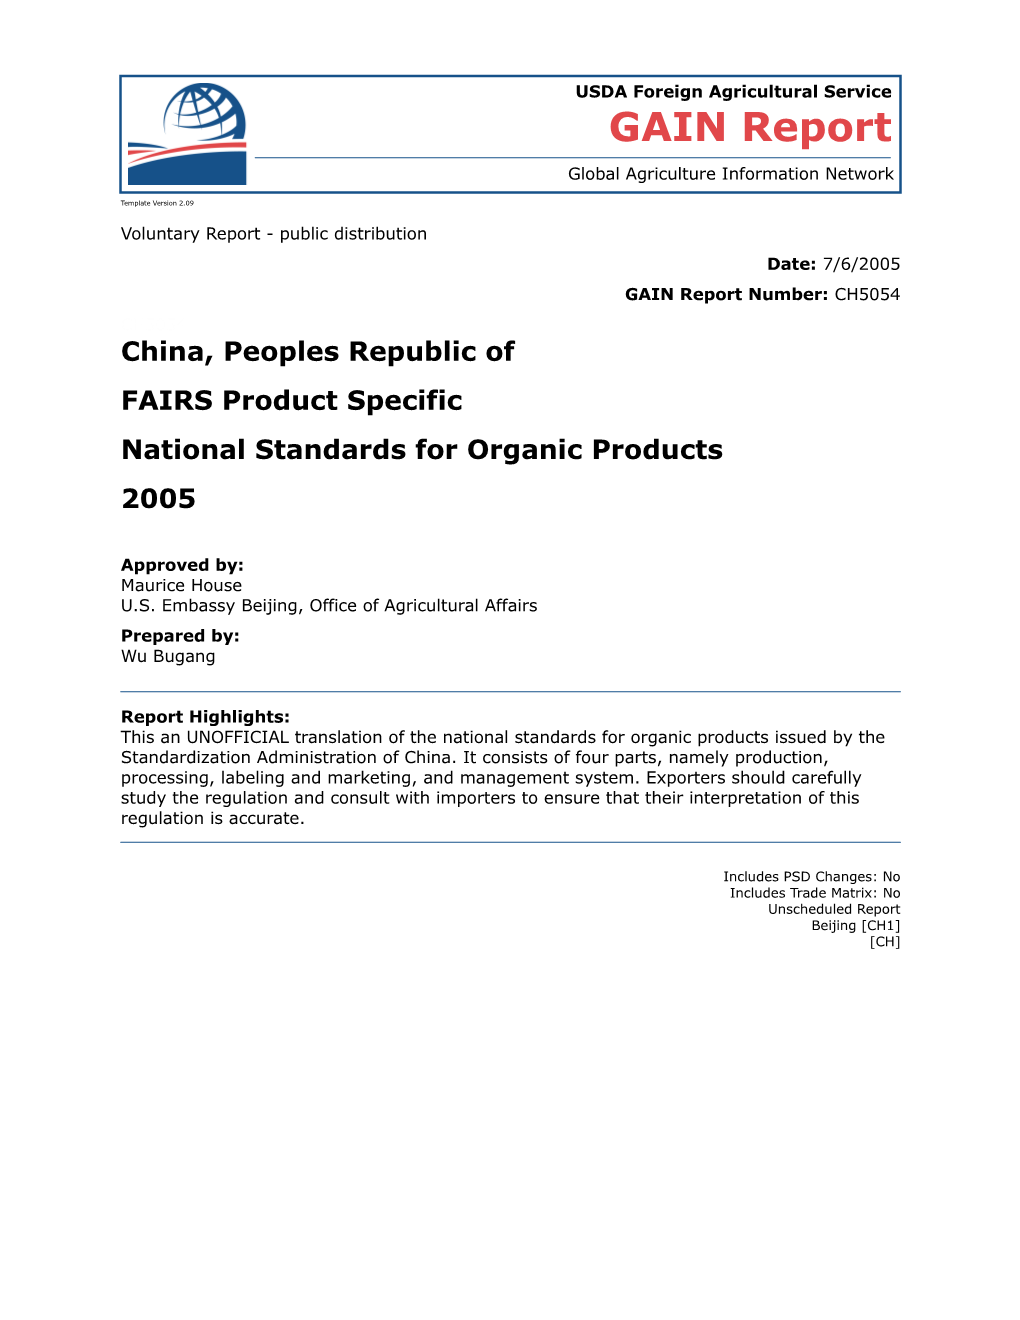 National Standards for Organic Products